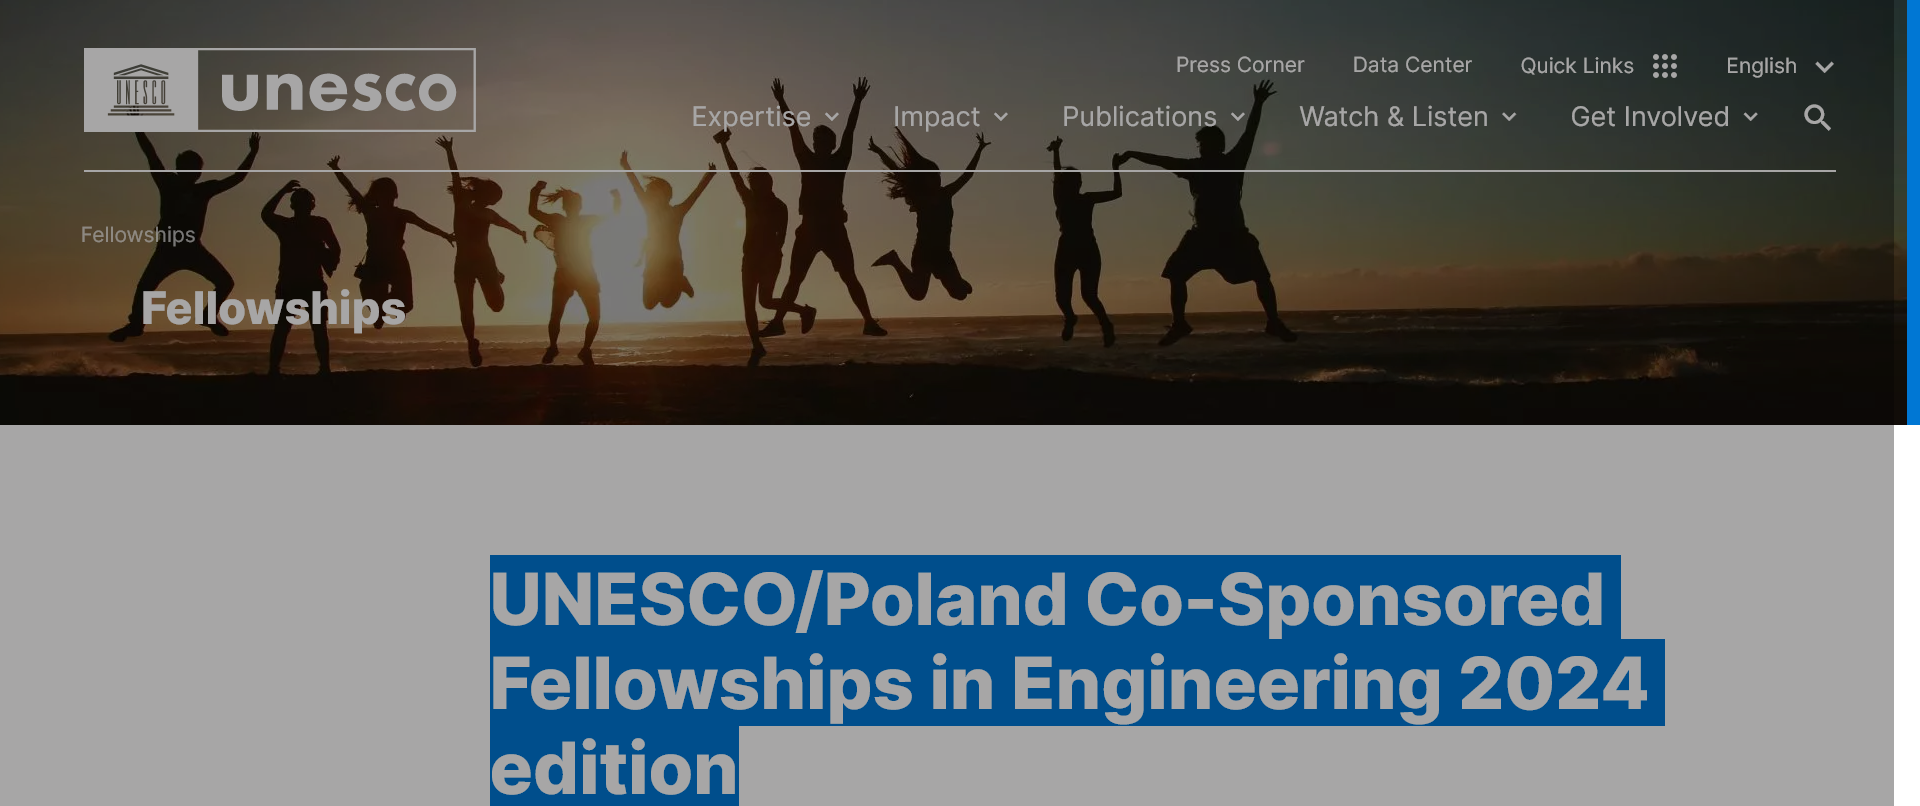 UNESCO/Poland Co-Sponsored Fellowships in Engineering 2024 edition